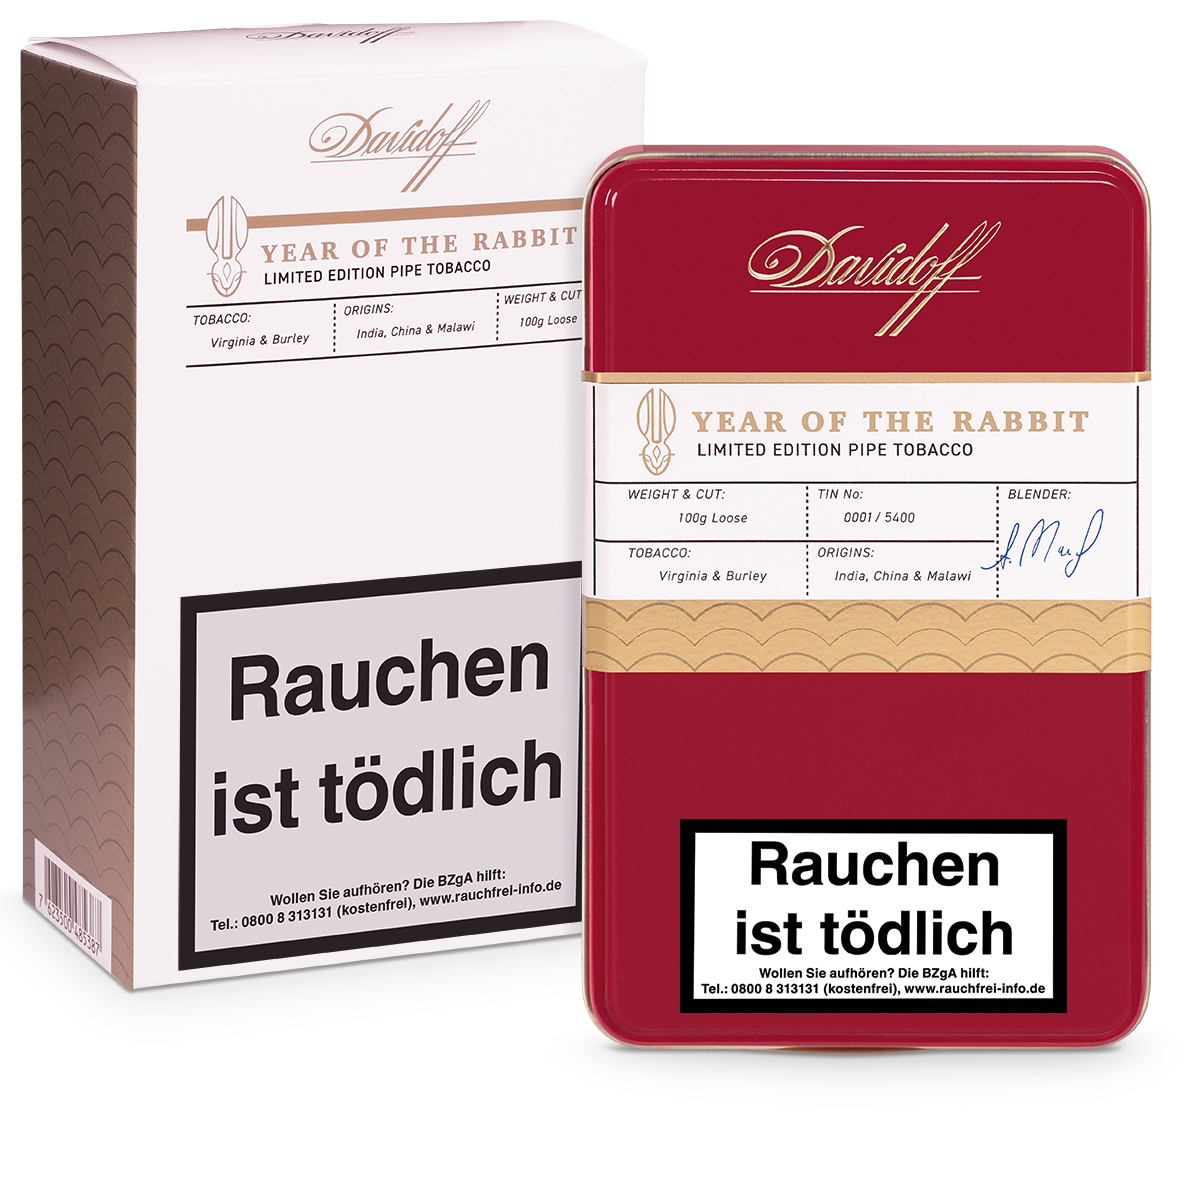 Davidoff Year of the Rabbit Pipe Tobacco Limited Edition 2023